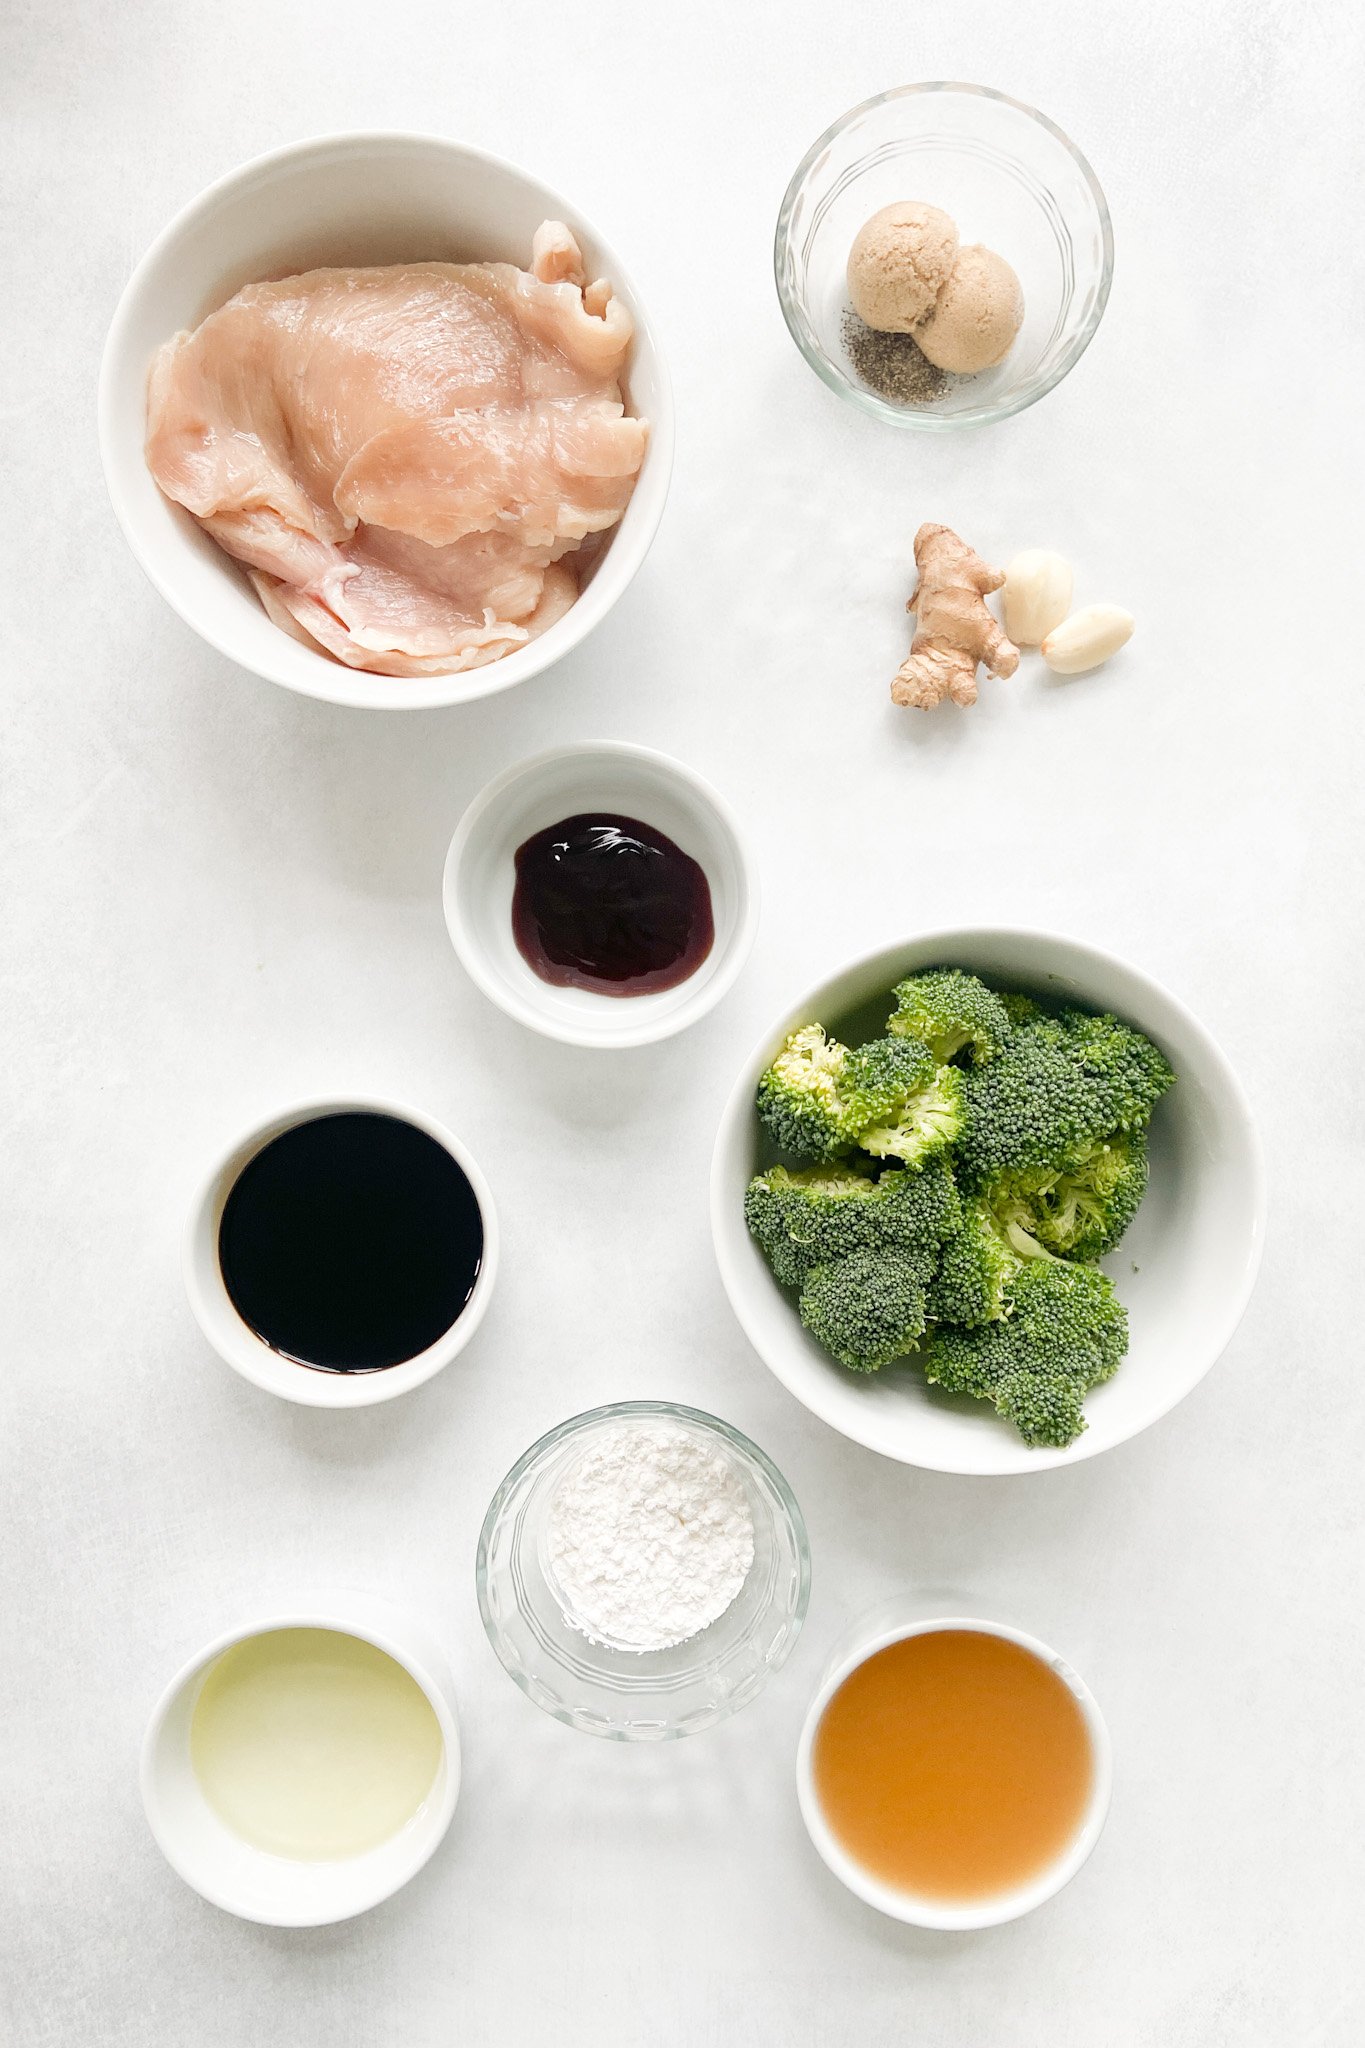 Ingredients to make chicken and broccoli stir-fry. See recipe card for detailed ingredient quantities.